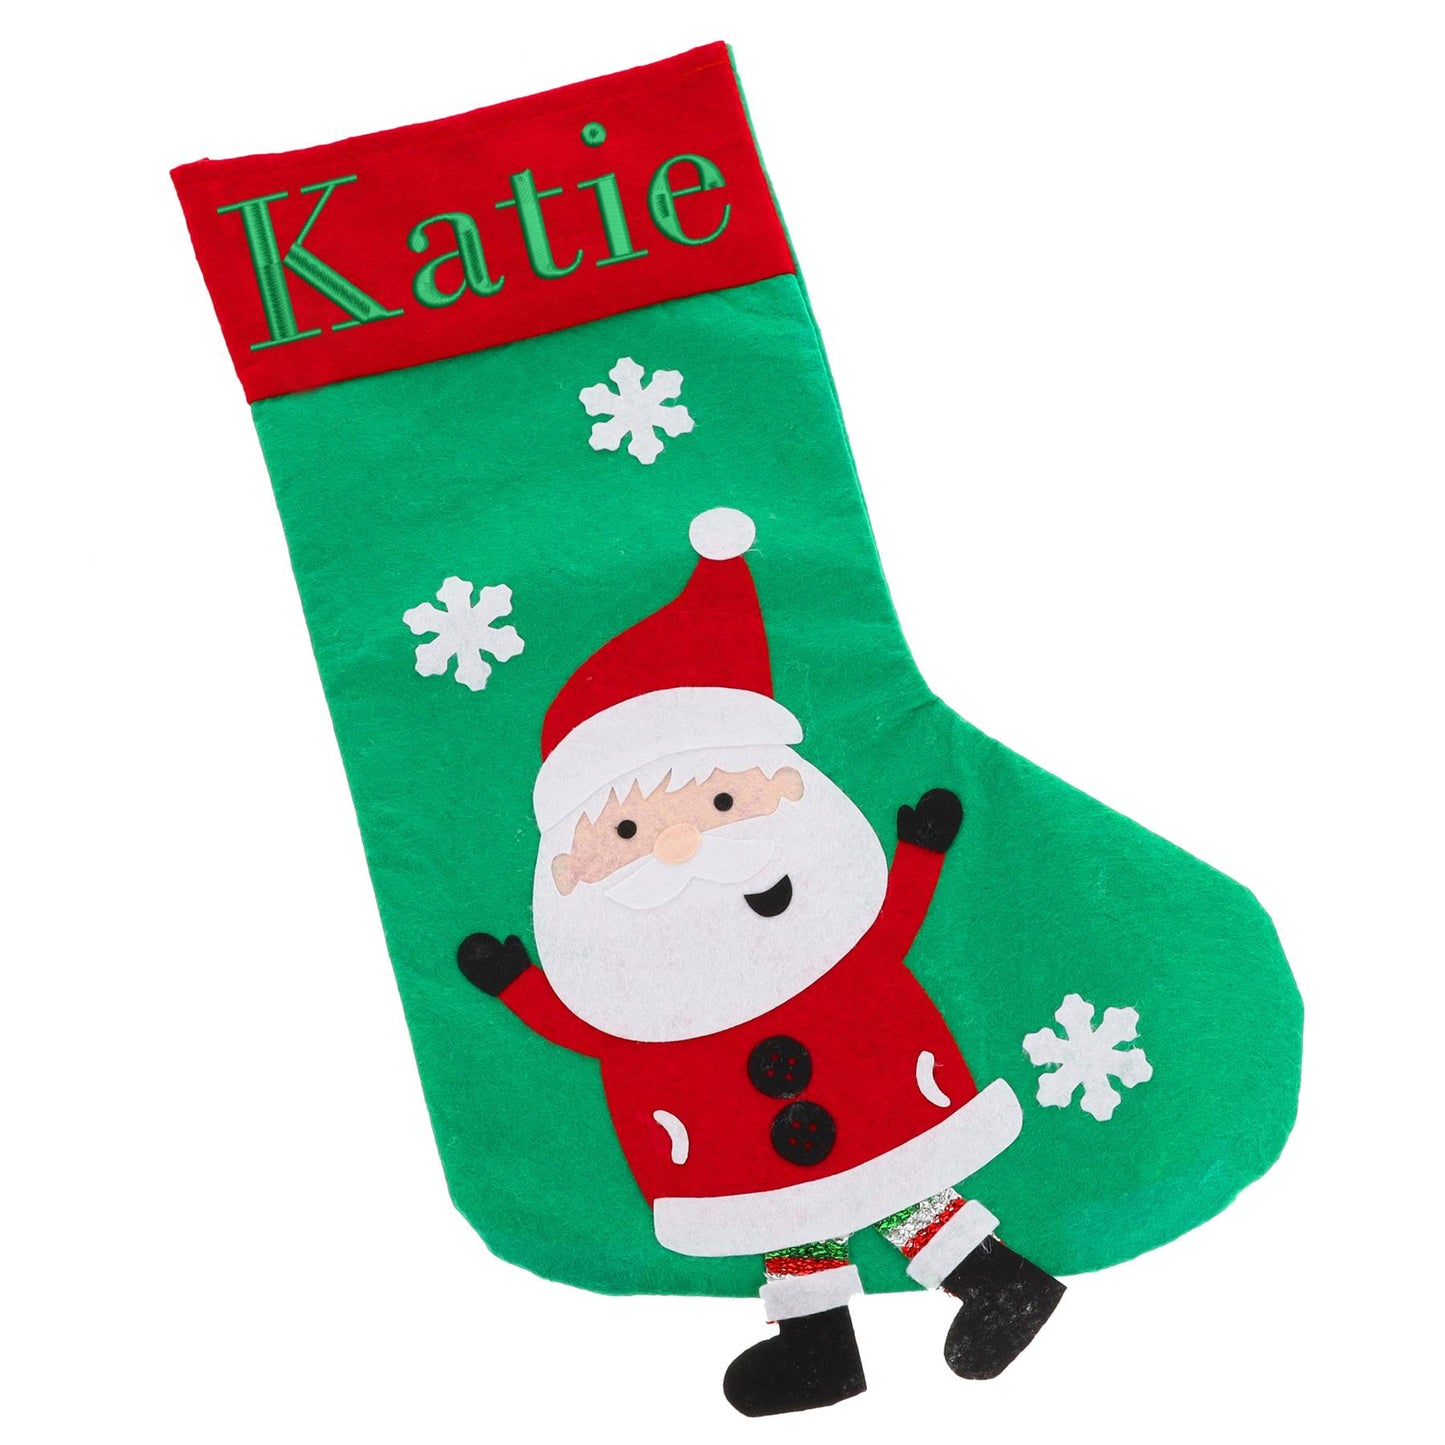 Embroidered Personalised Christmas Stocking With Santa Or Elf Design  - Always Looking Good -   